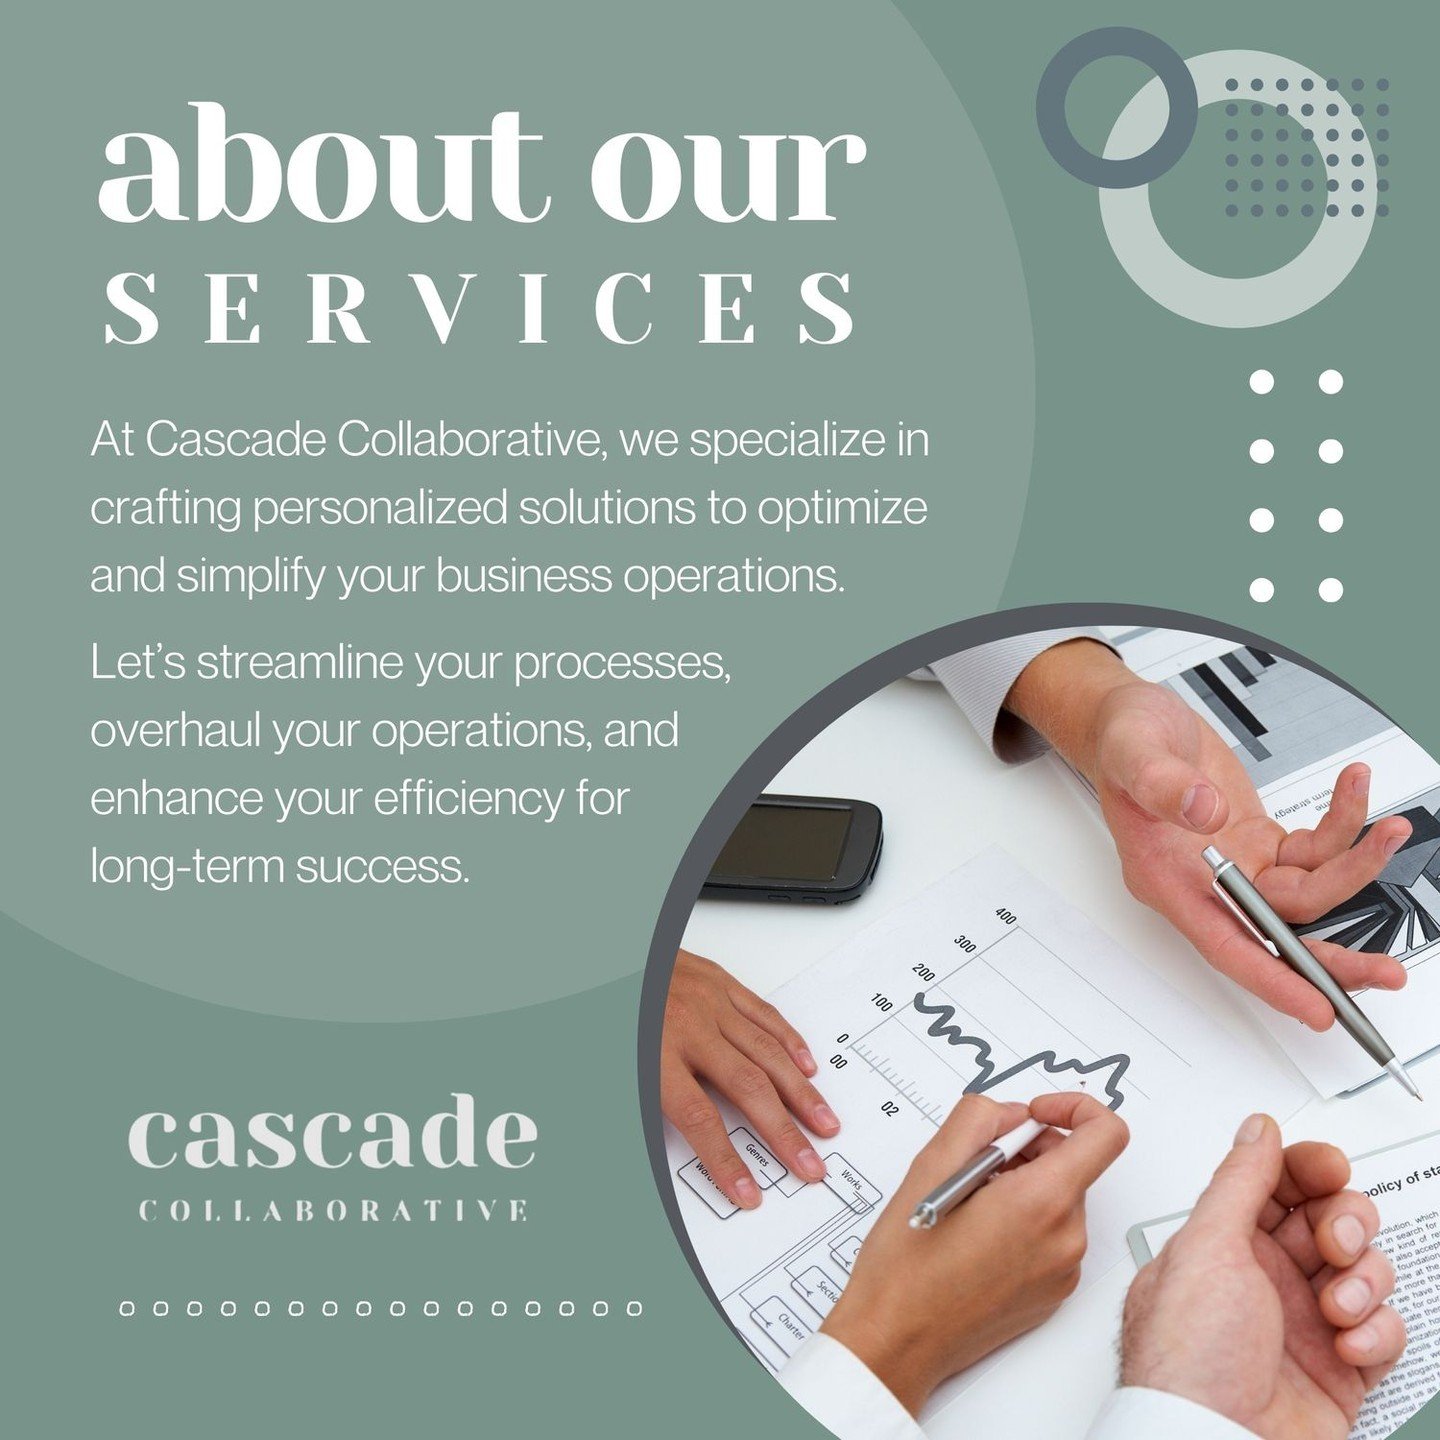 🚀 Elevate your business with Cascade Collaborative! 🌟 Our personalized solutions are tailored to optimize your operations, boost efficiency, and drive long-term success. Let's embark on a journey of transformation together! 

#BusinessOptimization 